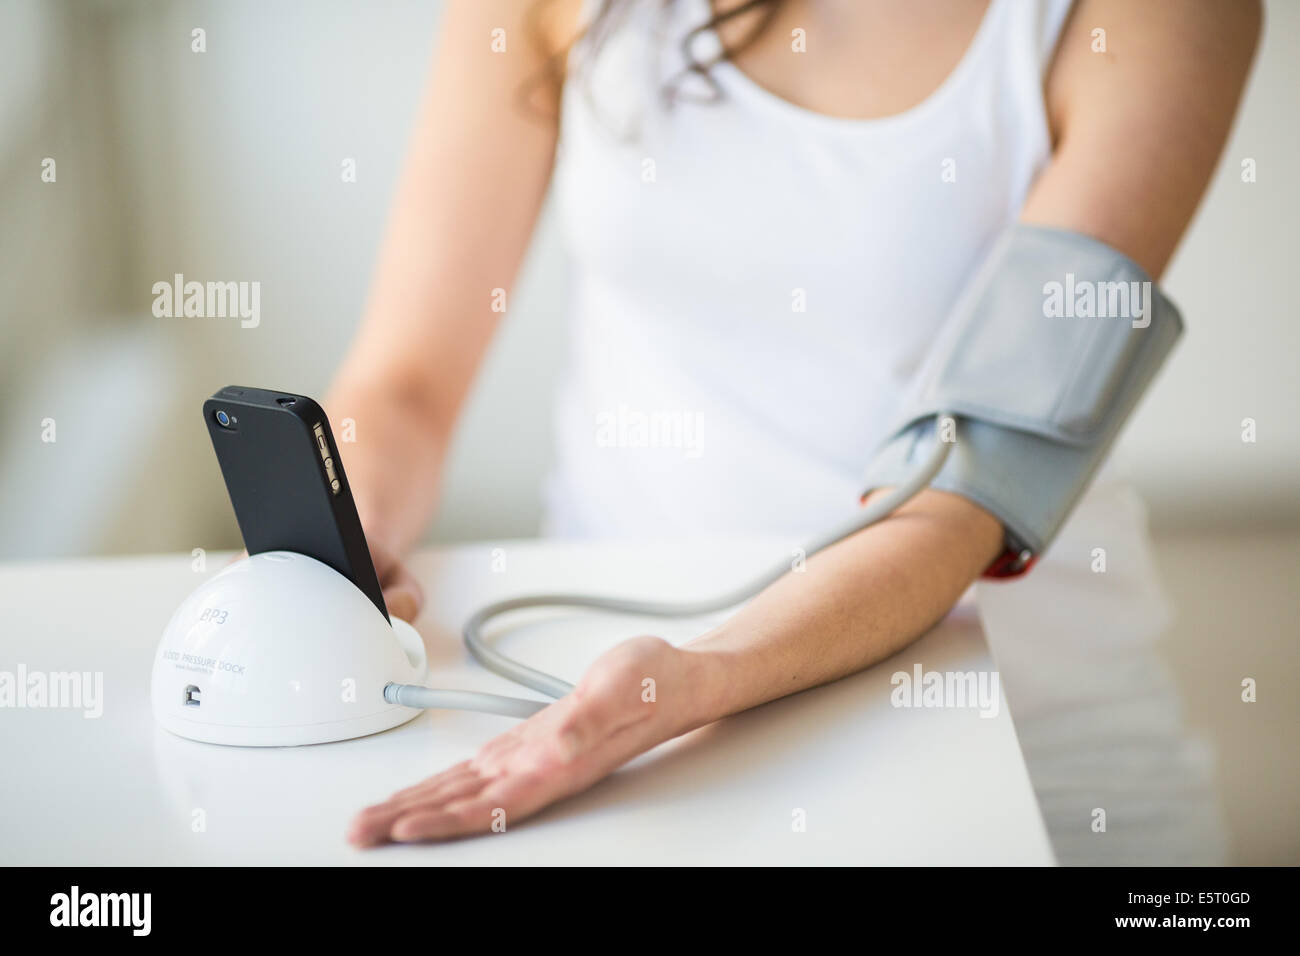 Woman taking her blood pressure with a docking station iPhone application iHealth®. Stock Photo